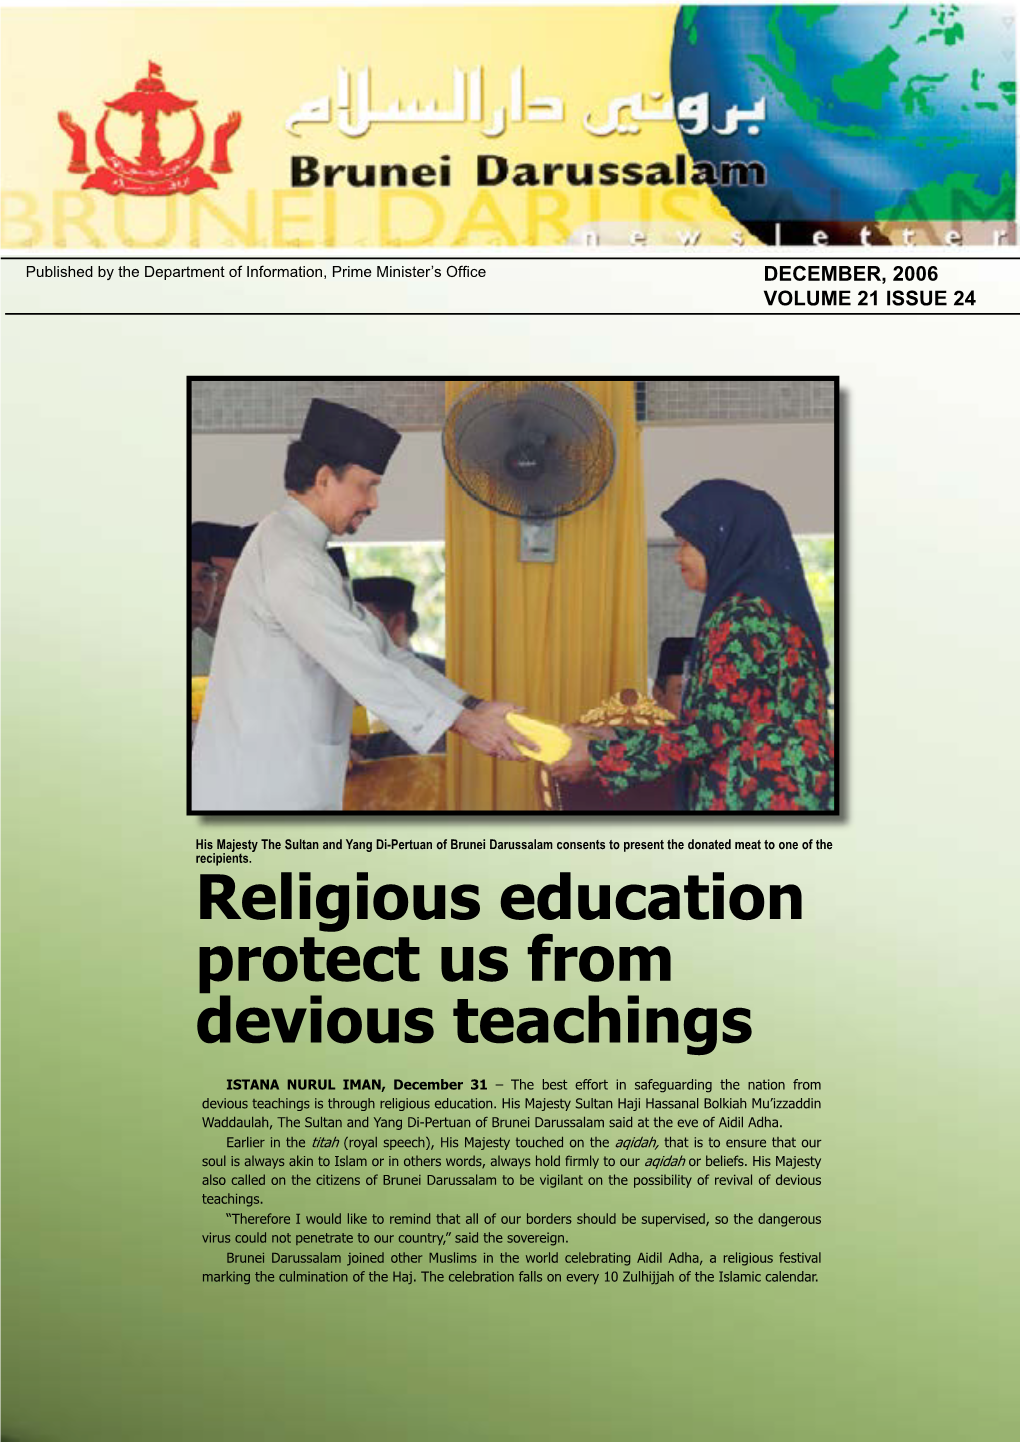 Religious Education Protect Us from Devious Teachings